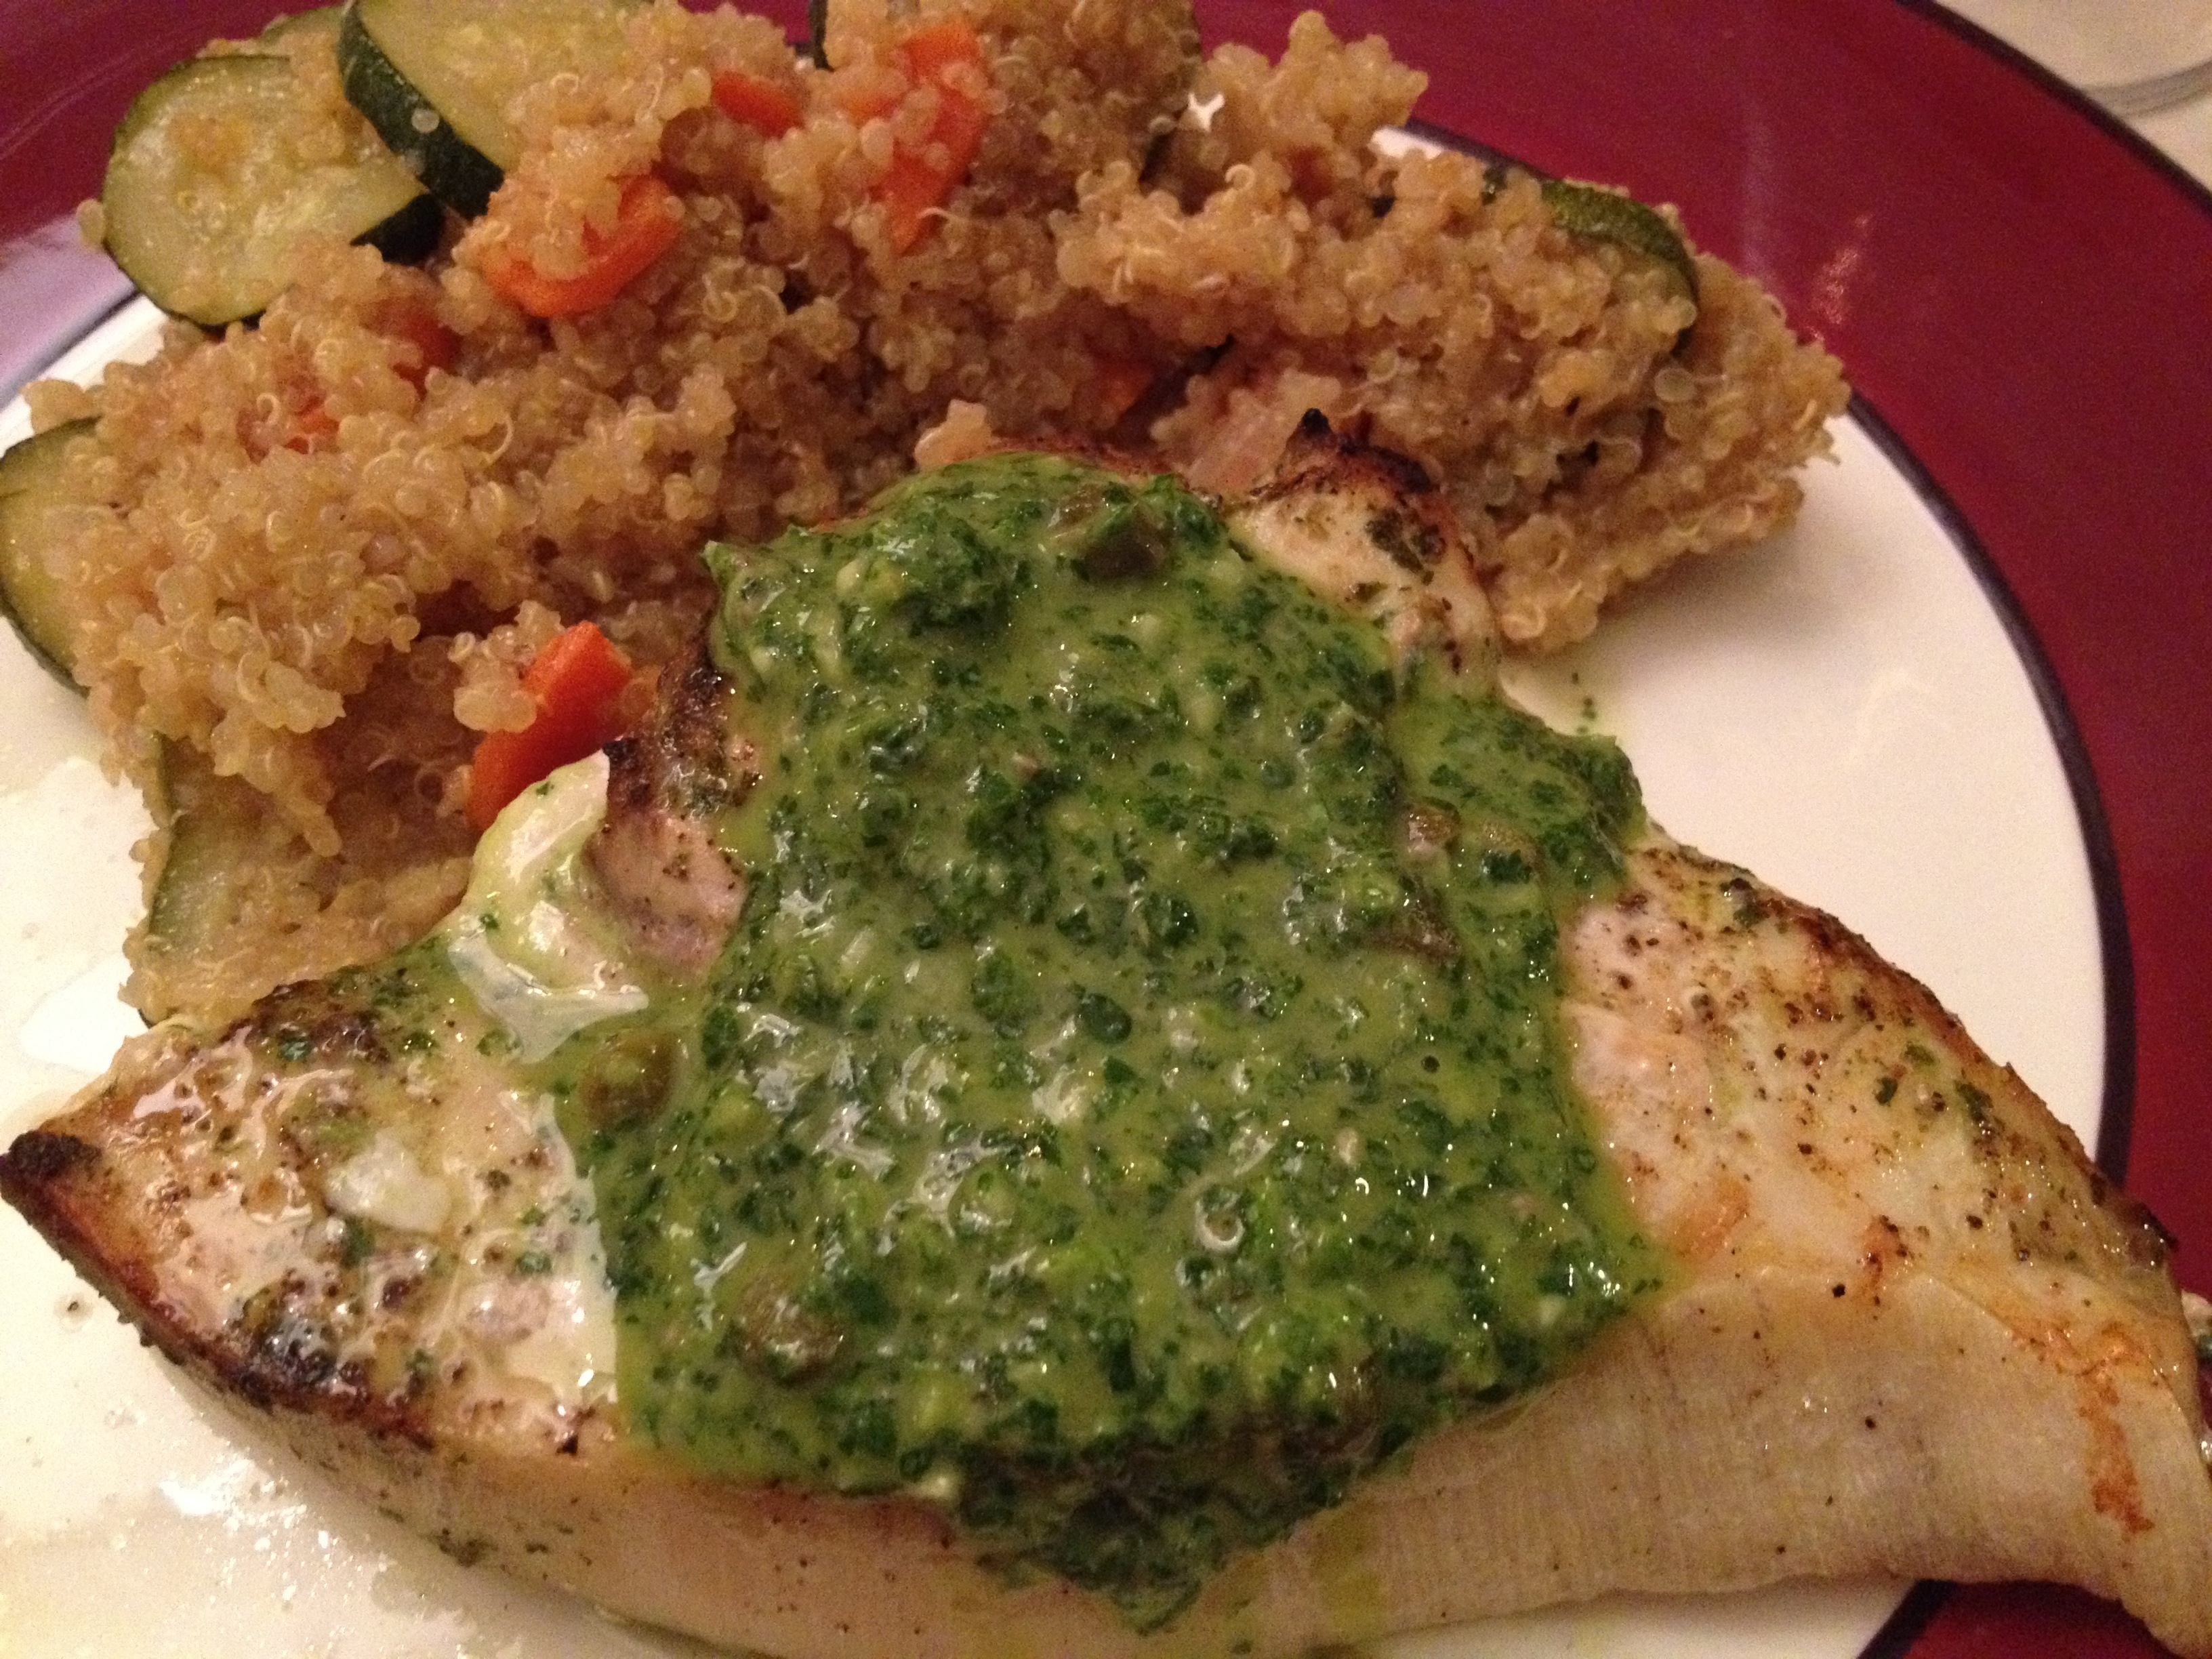 Broiled swordfish with parsley pesto and quinoa with sauteed vegetables